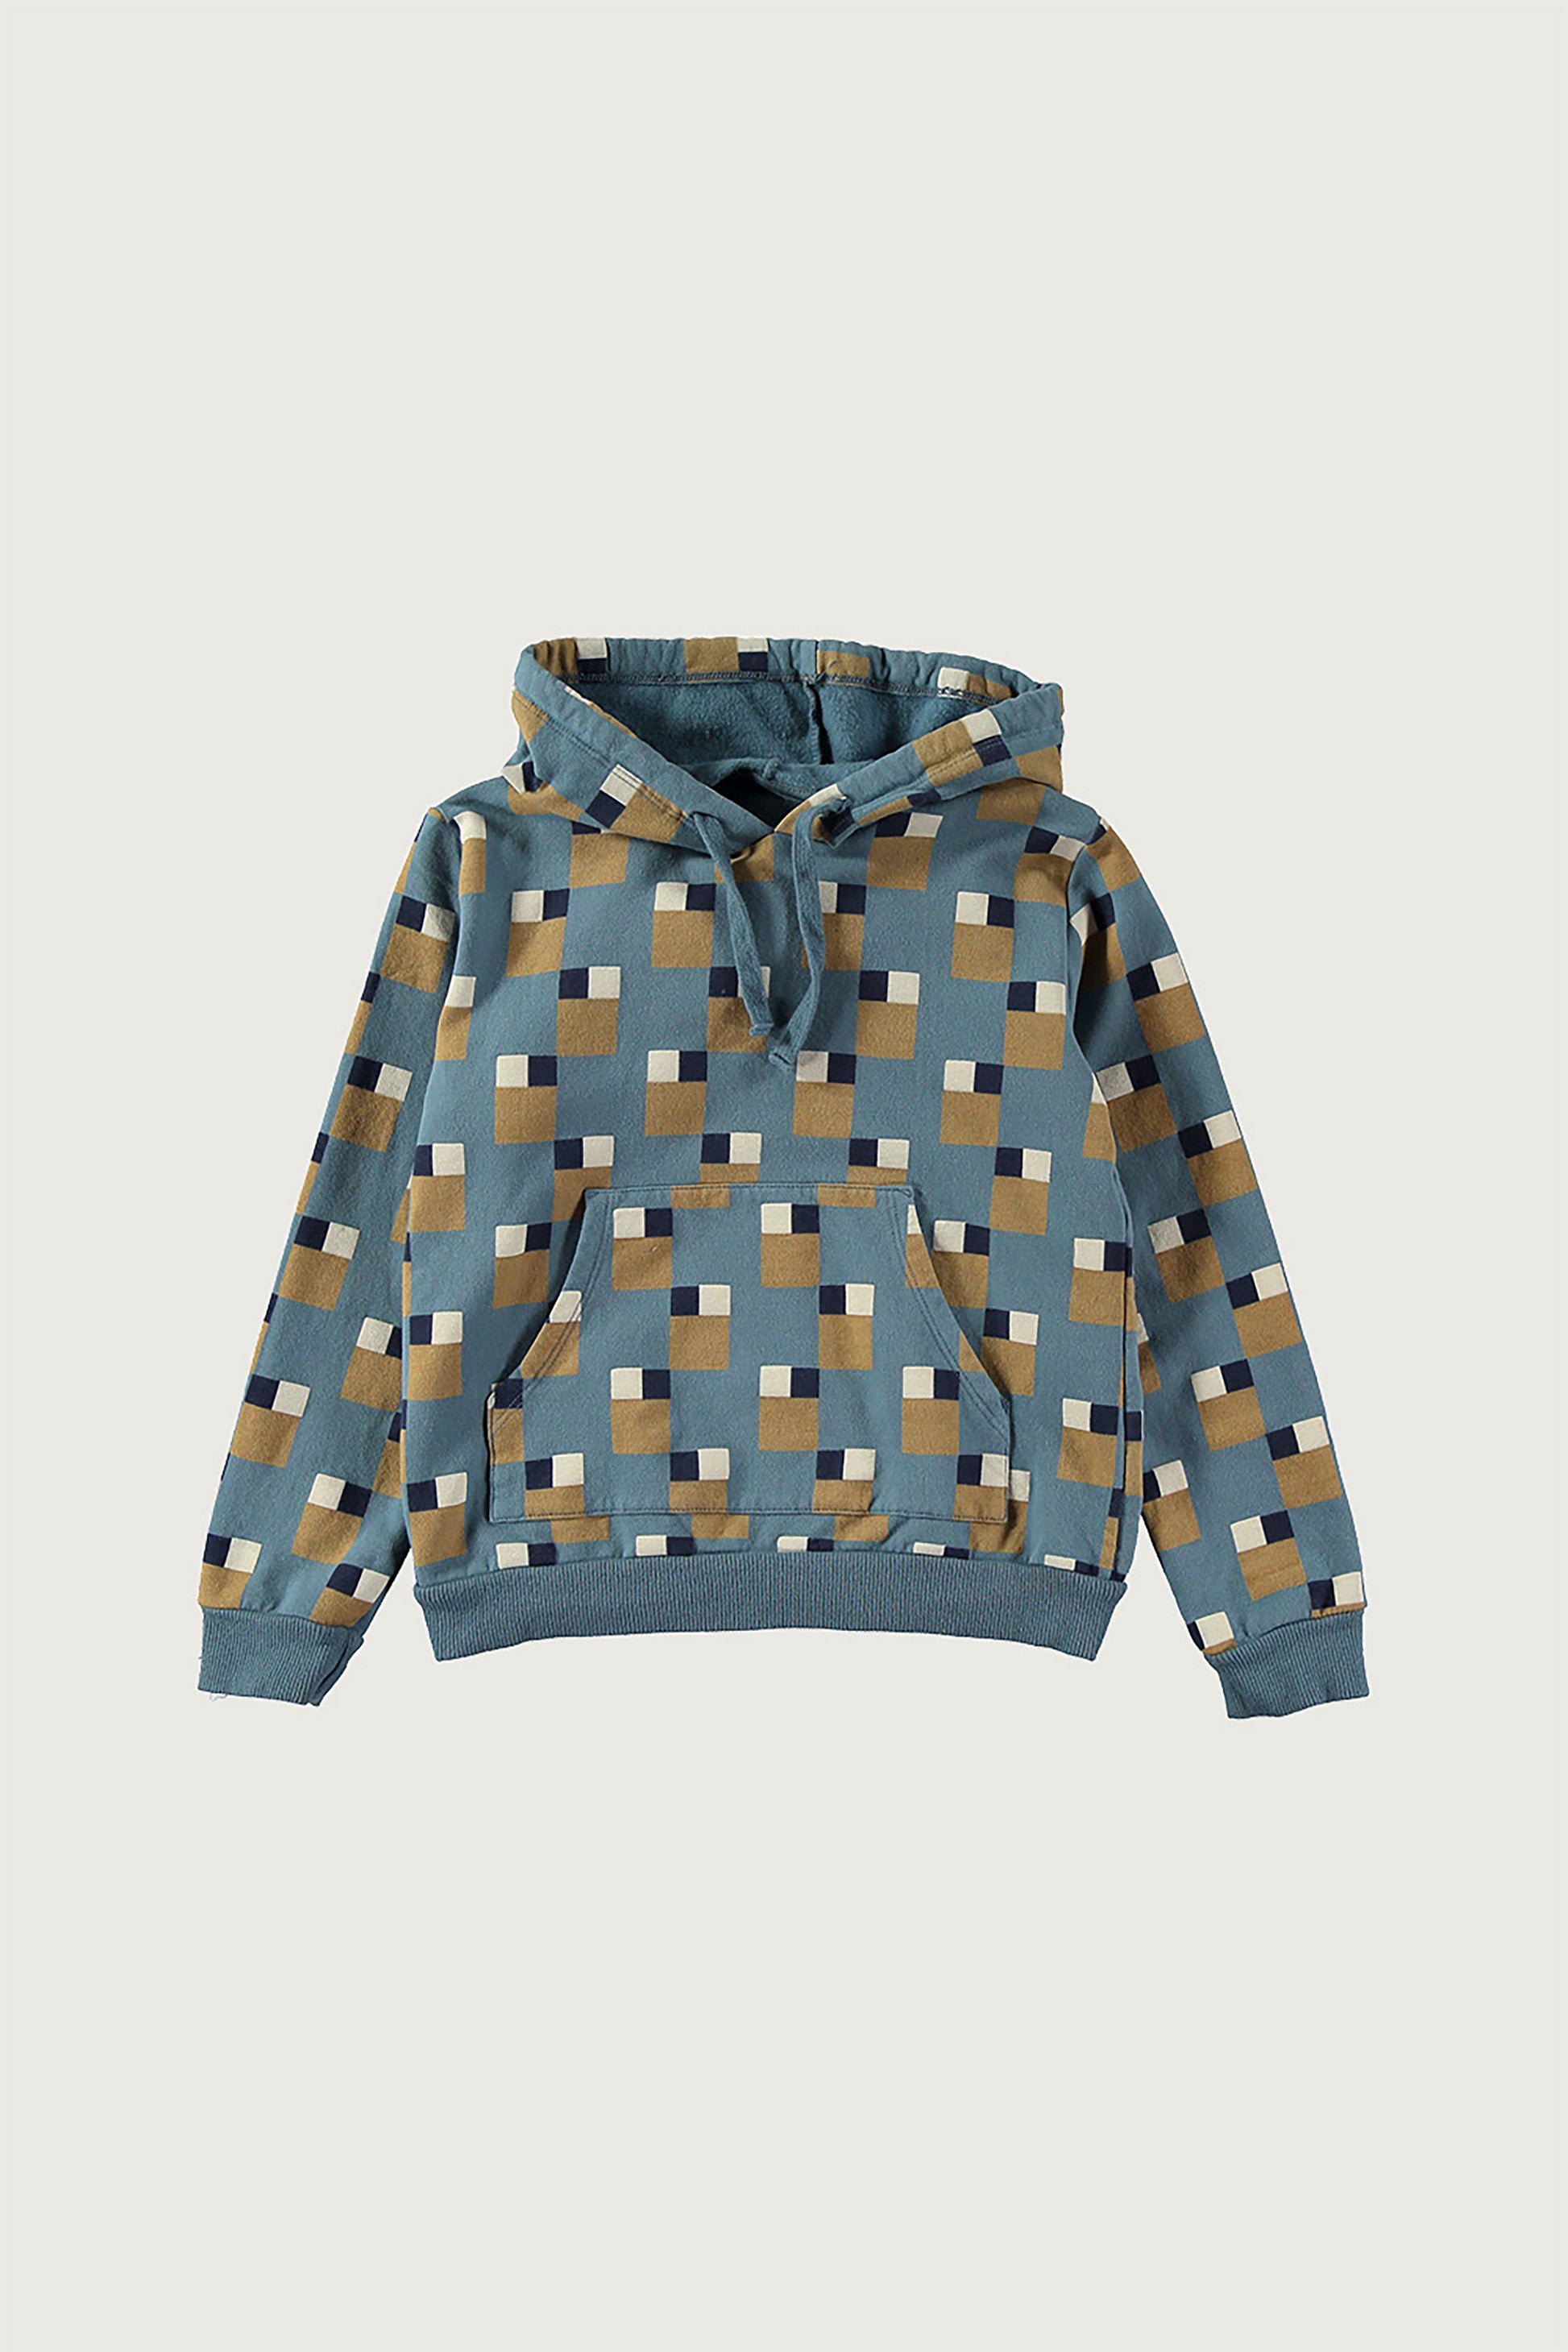 Coco Au Lait ABSTRACT ART HOODIE  Blue Mirage